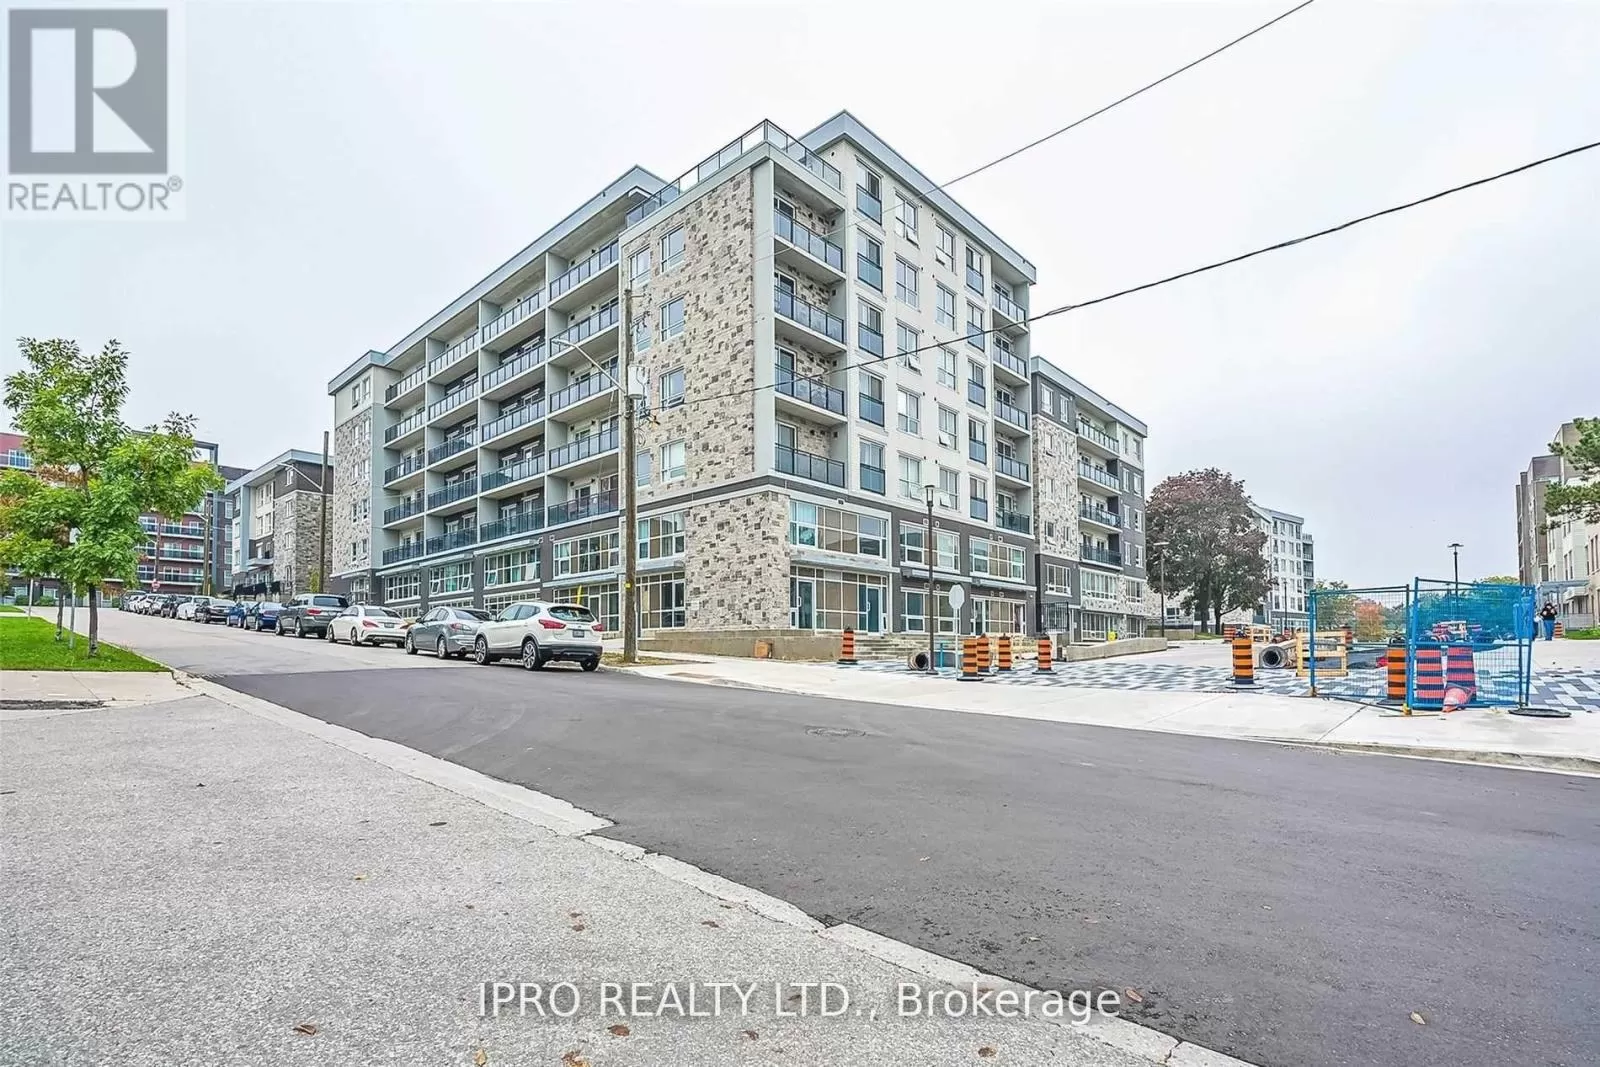 Apartment for rent: H507 - 275 Larch Street E, Waterloo, Ontario N2L 3R2